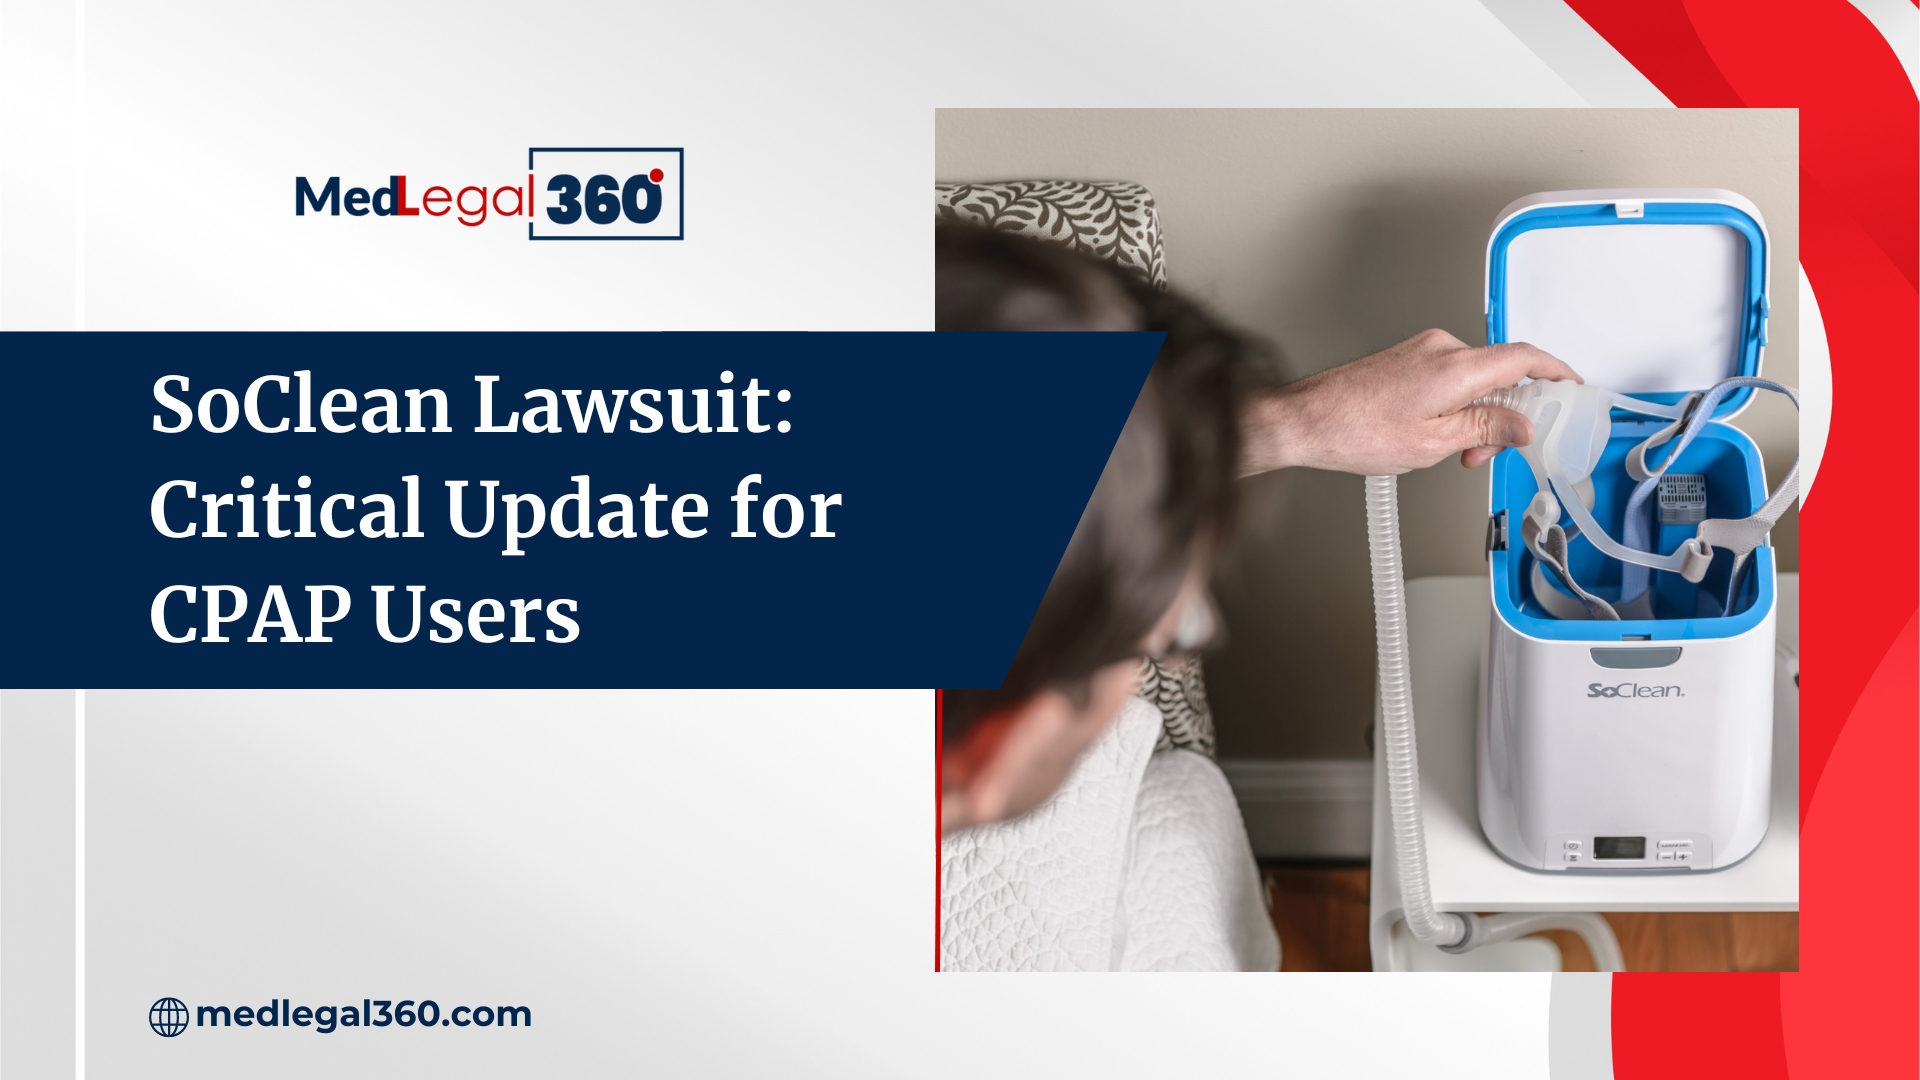 SoClean Lawsuit: Critical Update for CPAP Users